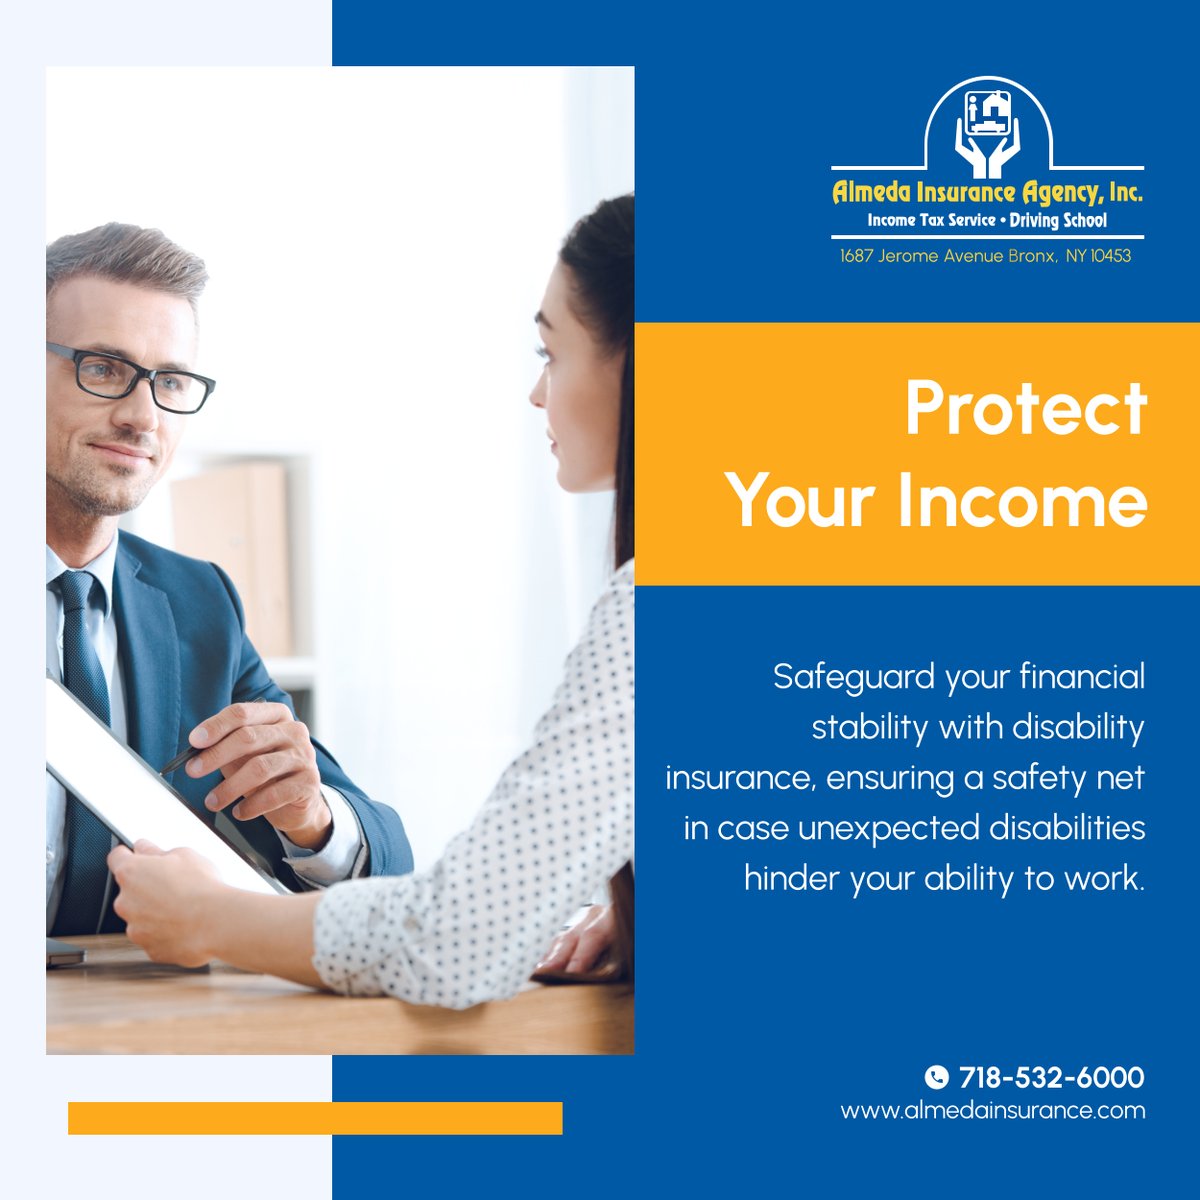 Don't let unexpected disabilities jeopardize your financial stability. Discover how disability insurance from Almeda Insurance Agency, Inc. can protect your income and provide peace of mind. 

#BronxNY #InsuranceServices #DisabilityInsurance #FinancialSecurity #InsuranceCoverage